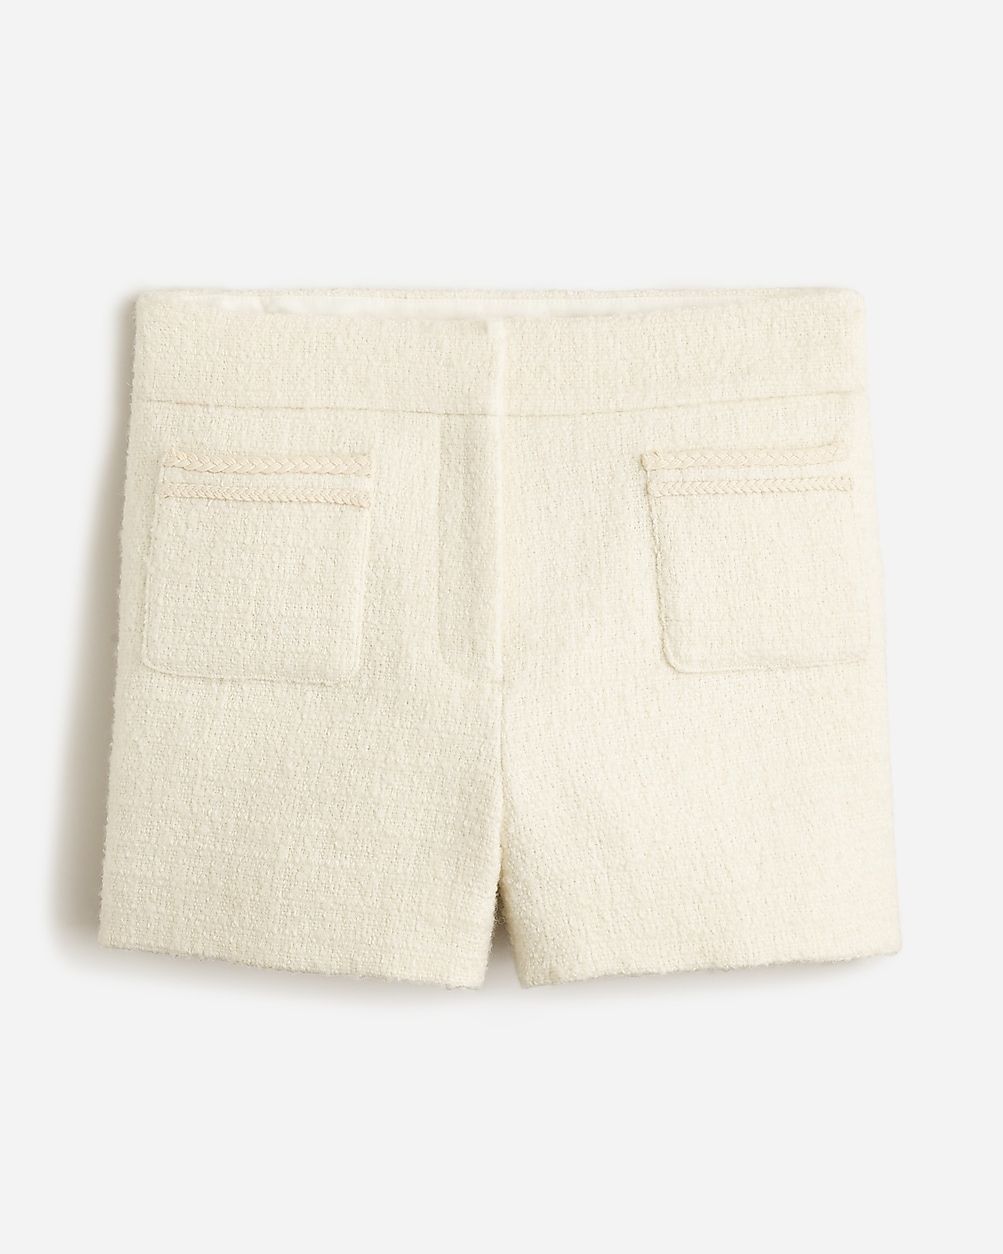 Limited-edition patch-pocket suit short in maritime tweed | J.Crew US